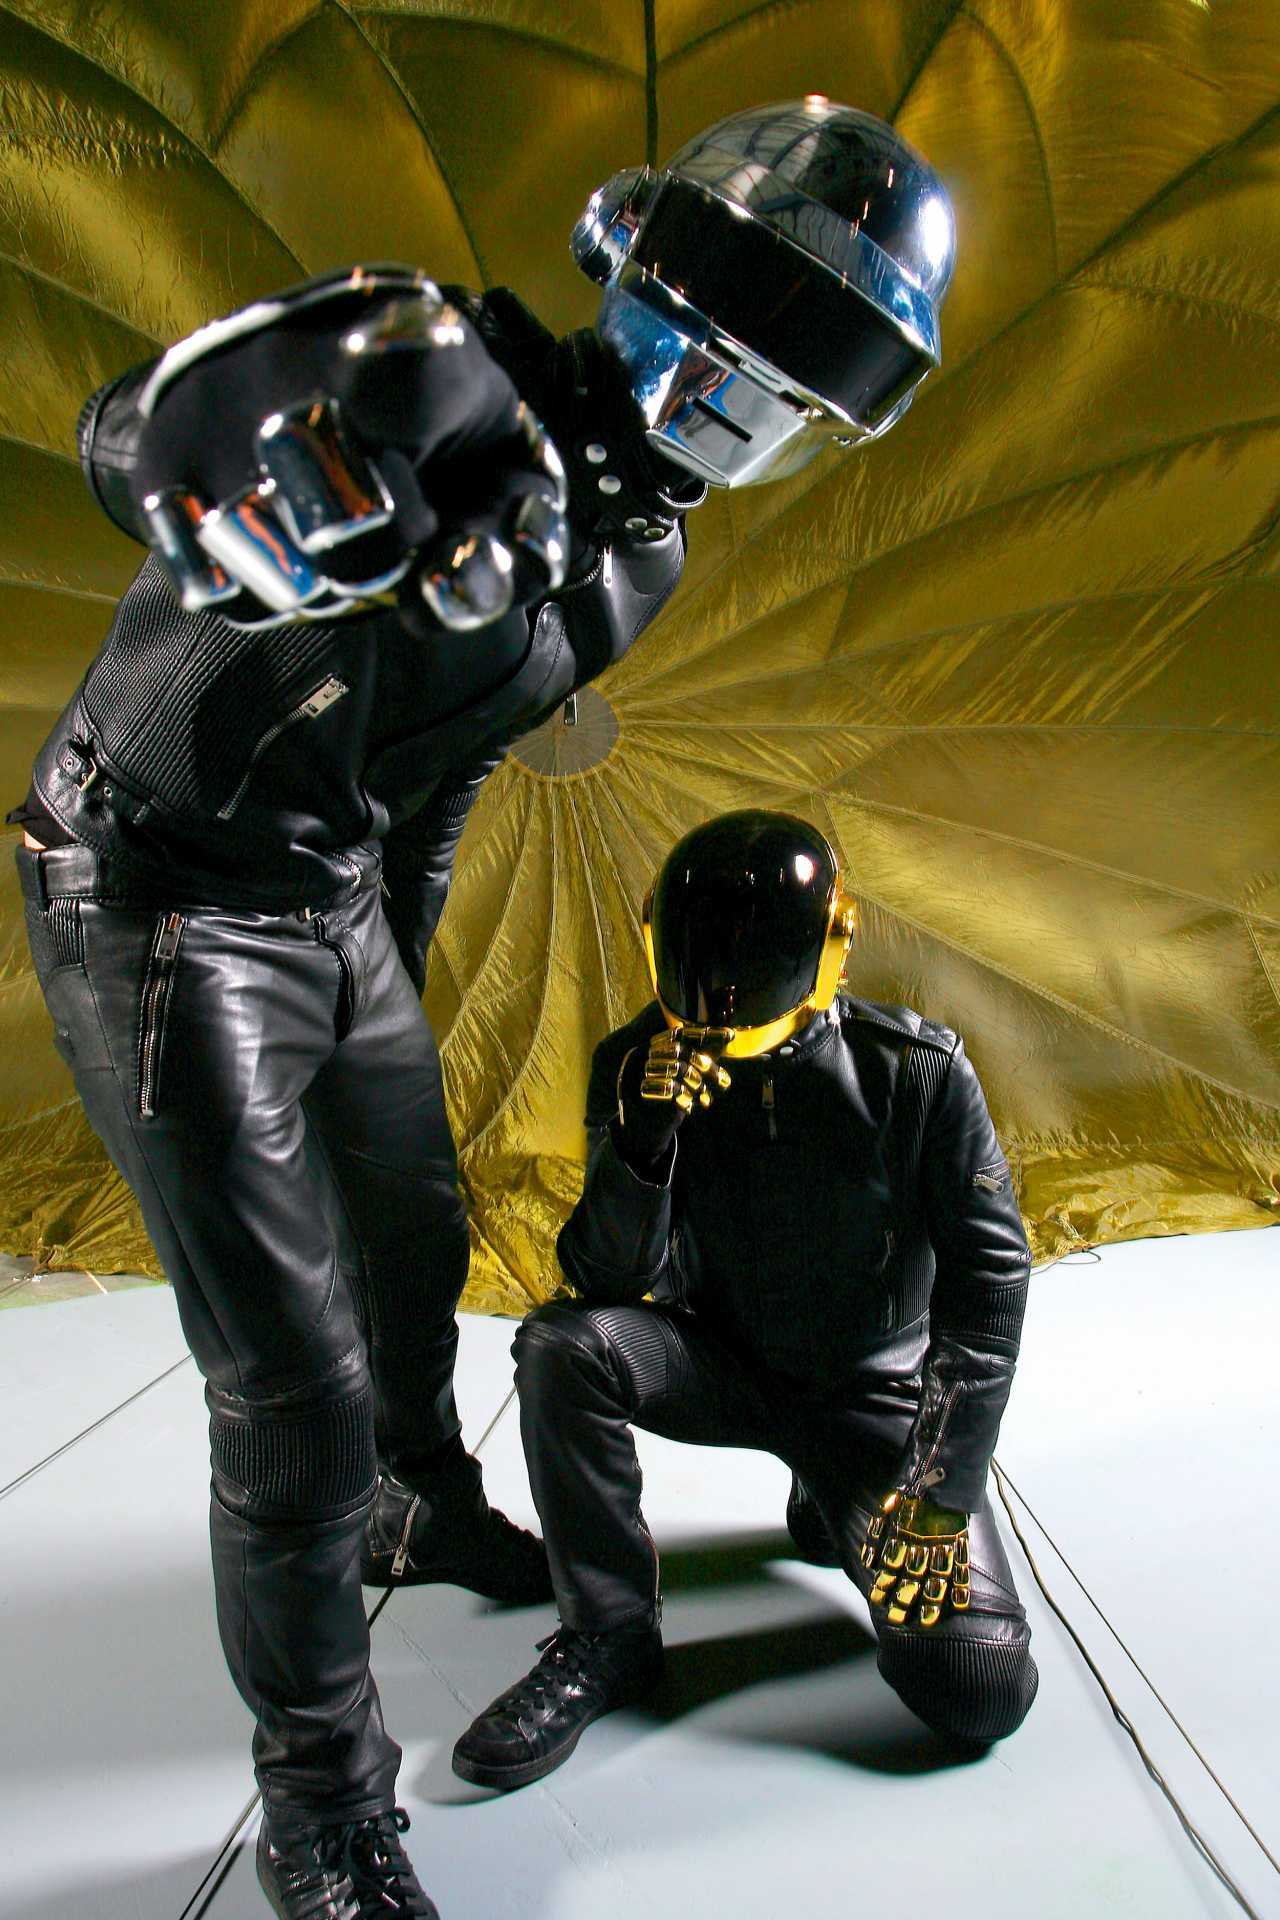 Daft Punk photographed by Mick Rock